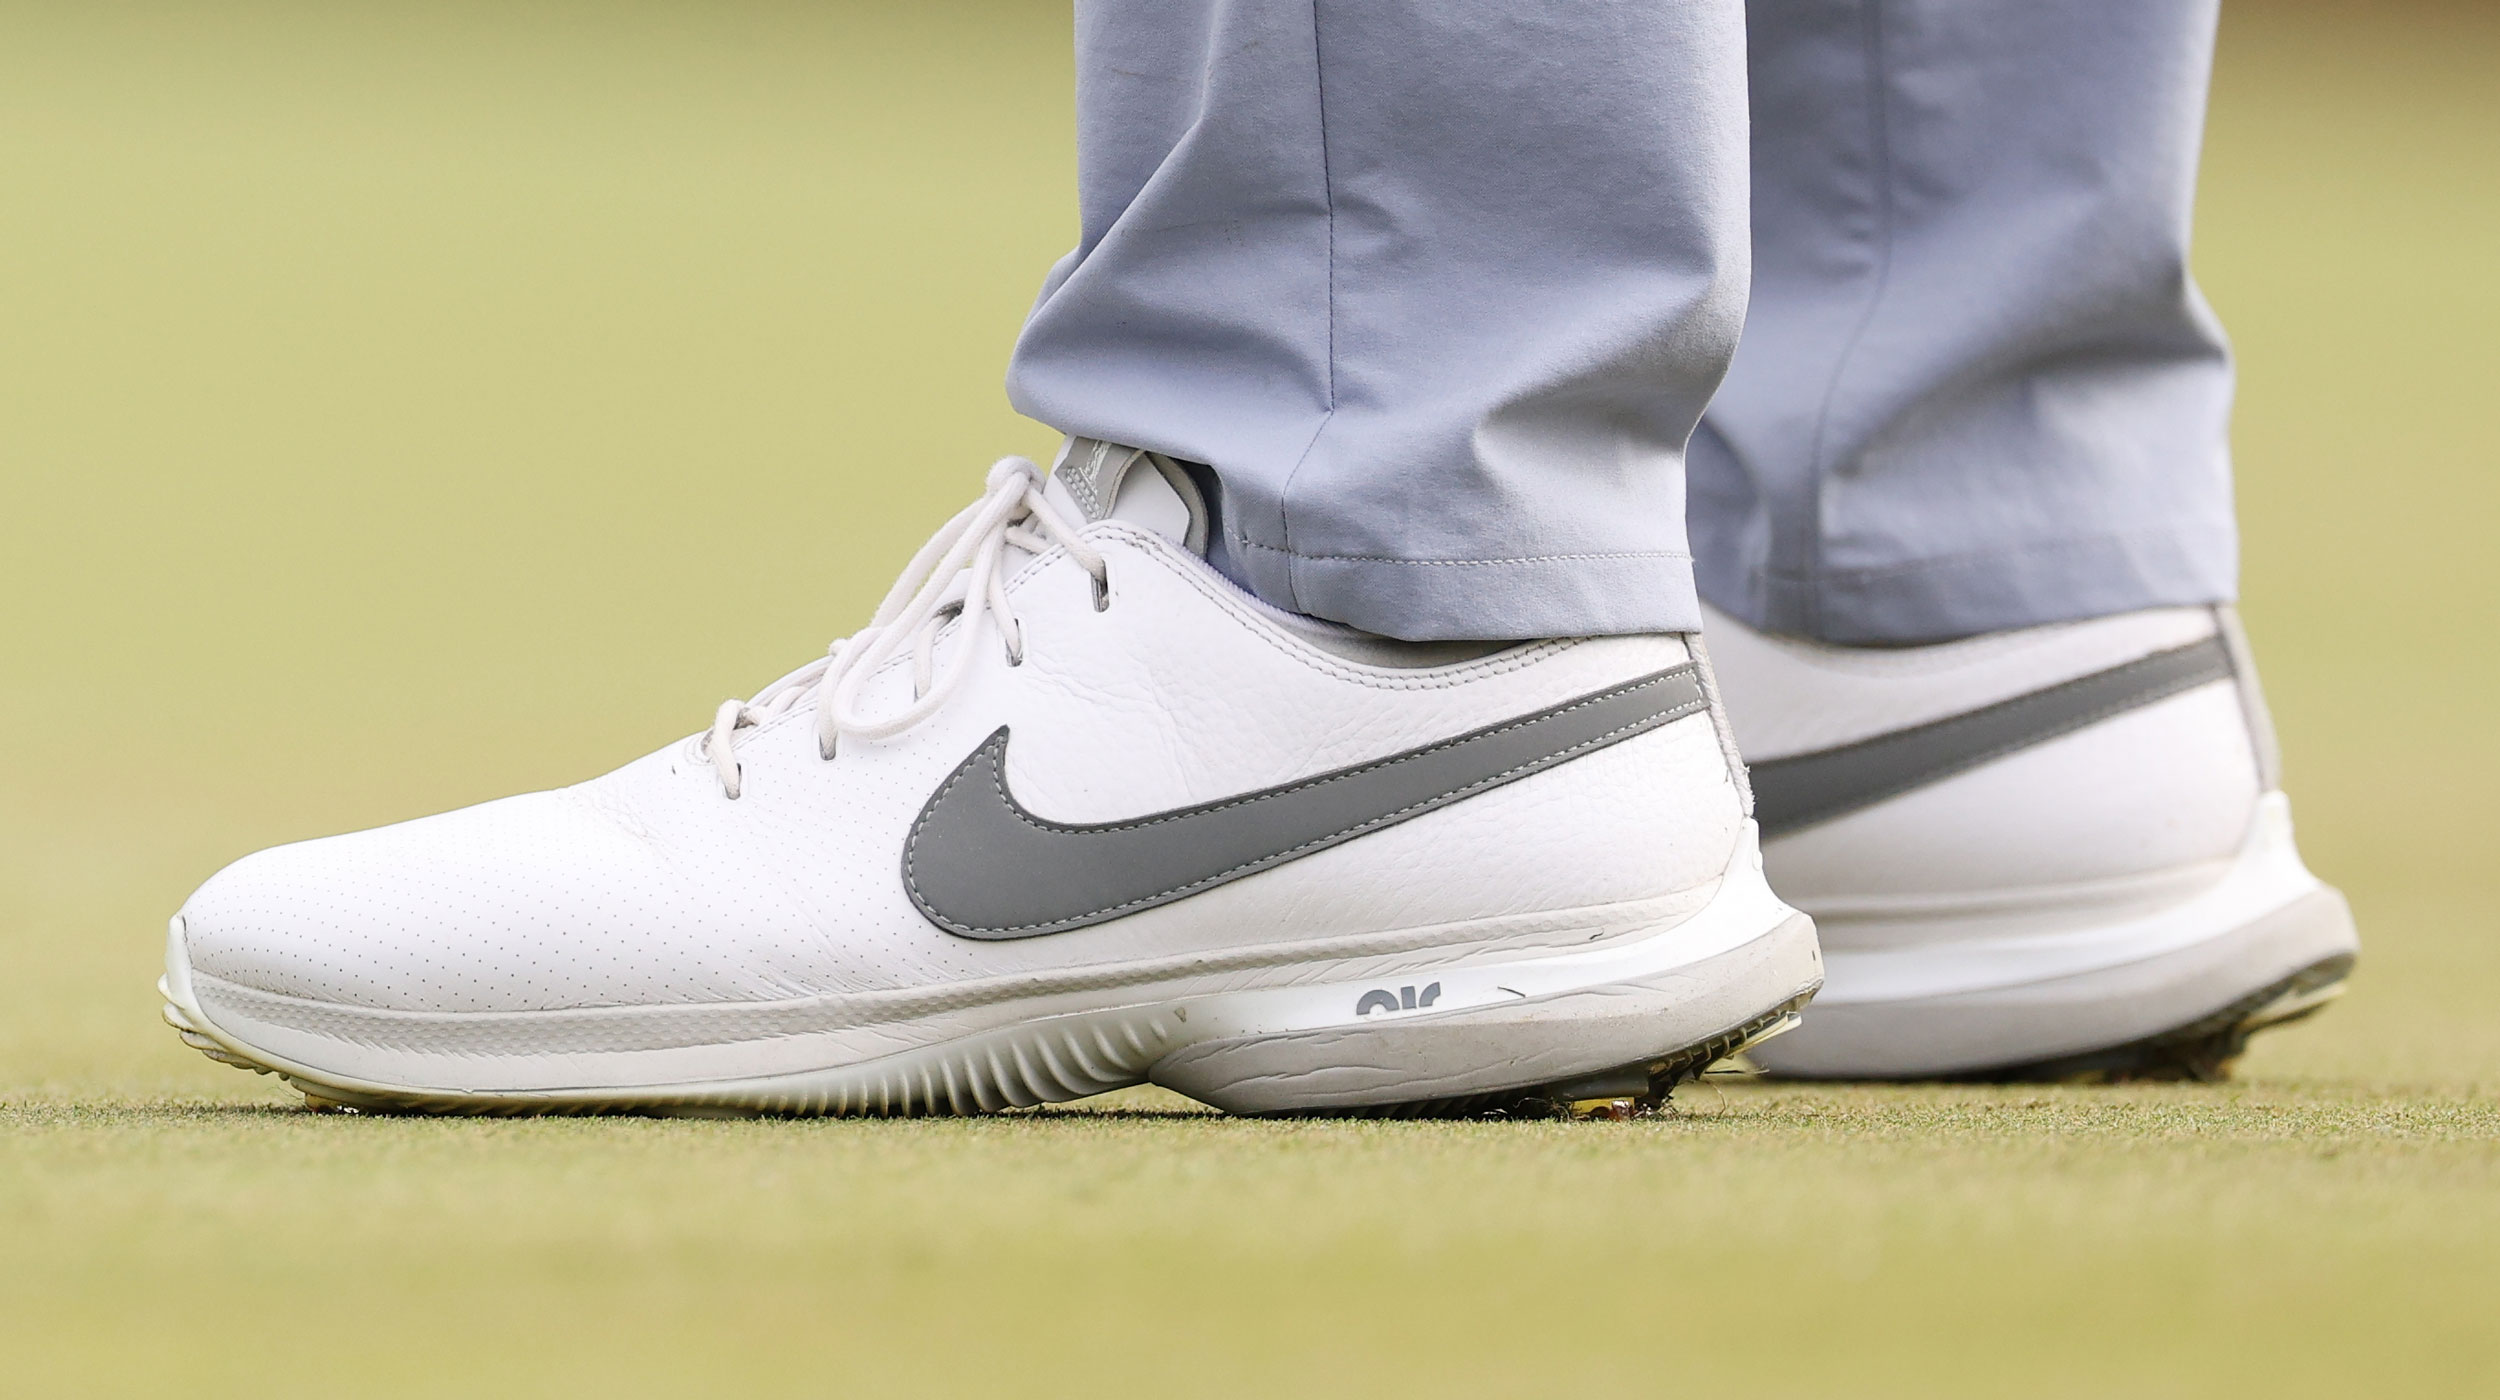 Geheugen fort Bij zonsopgang What Shoes Does Rory McIlroy Wear | Golf Monthly